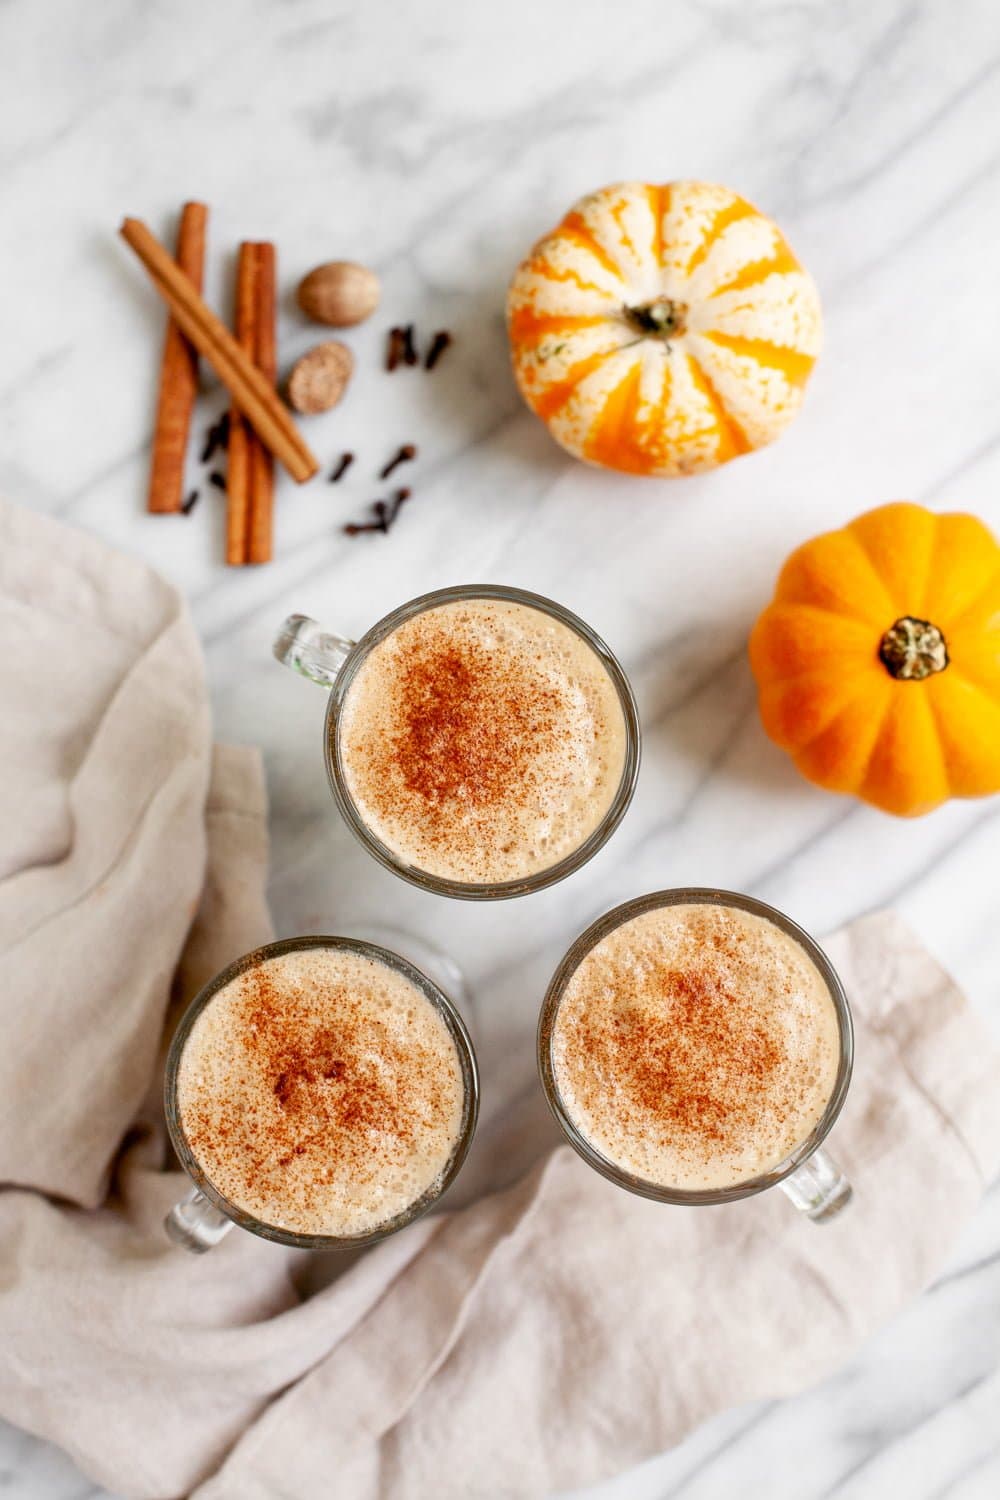 Overhead of three glass mugs filled with lattes and topped with cinnamon, with whole spices and mini pumpkins nearby.